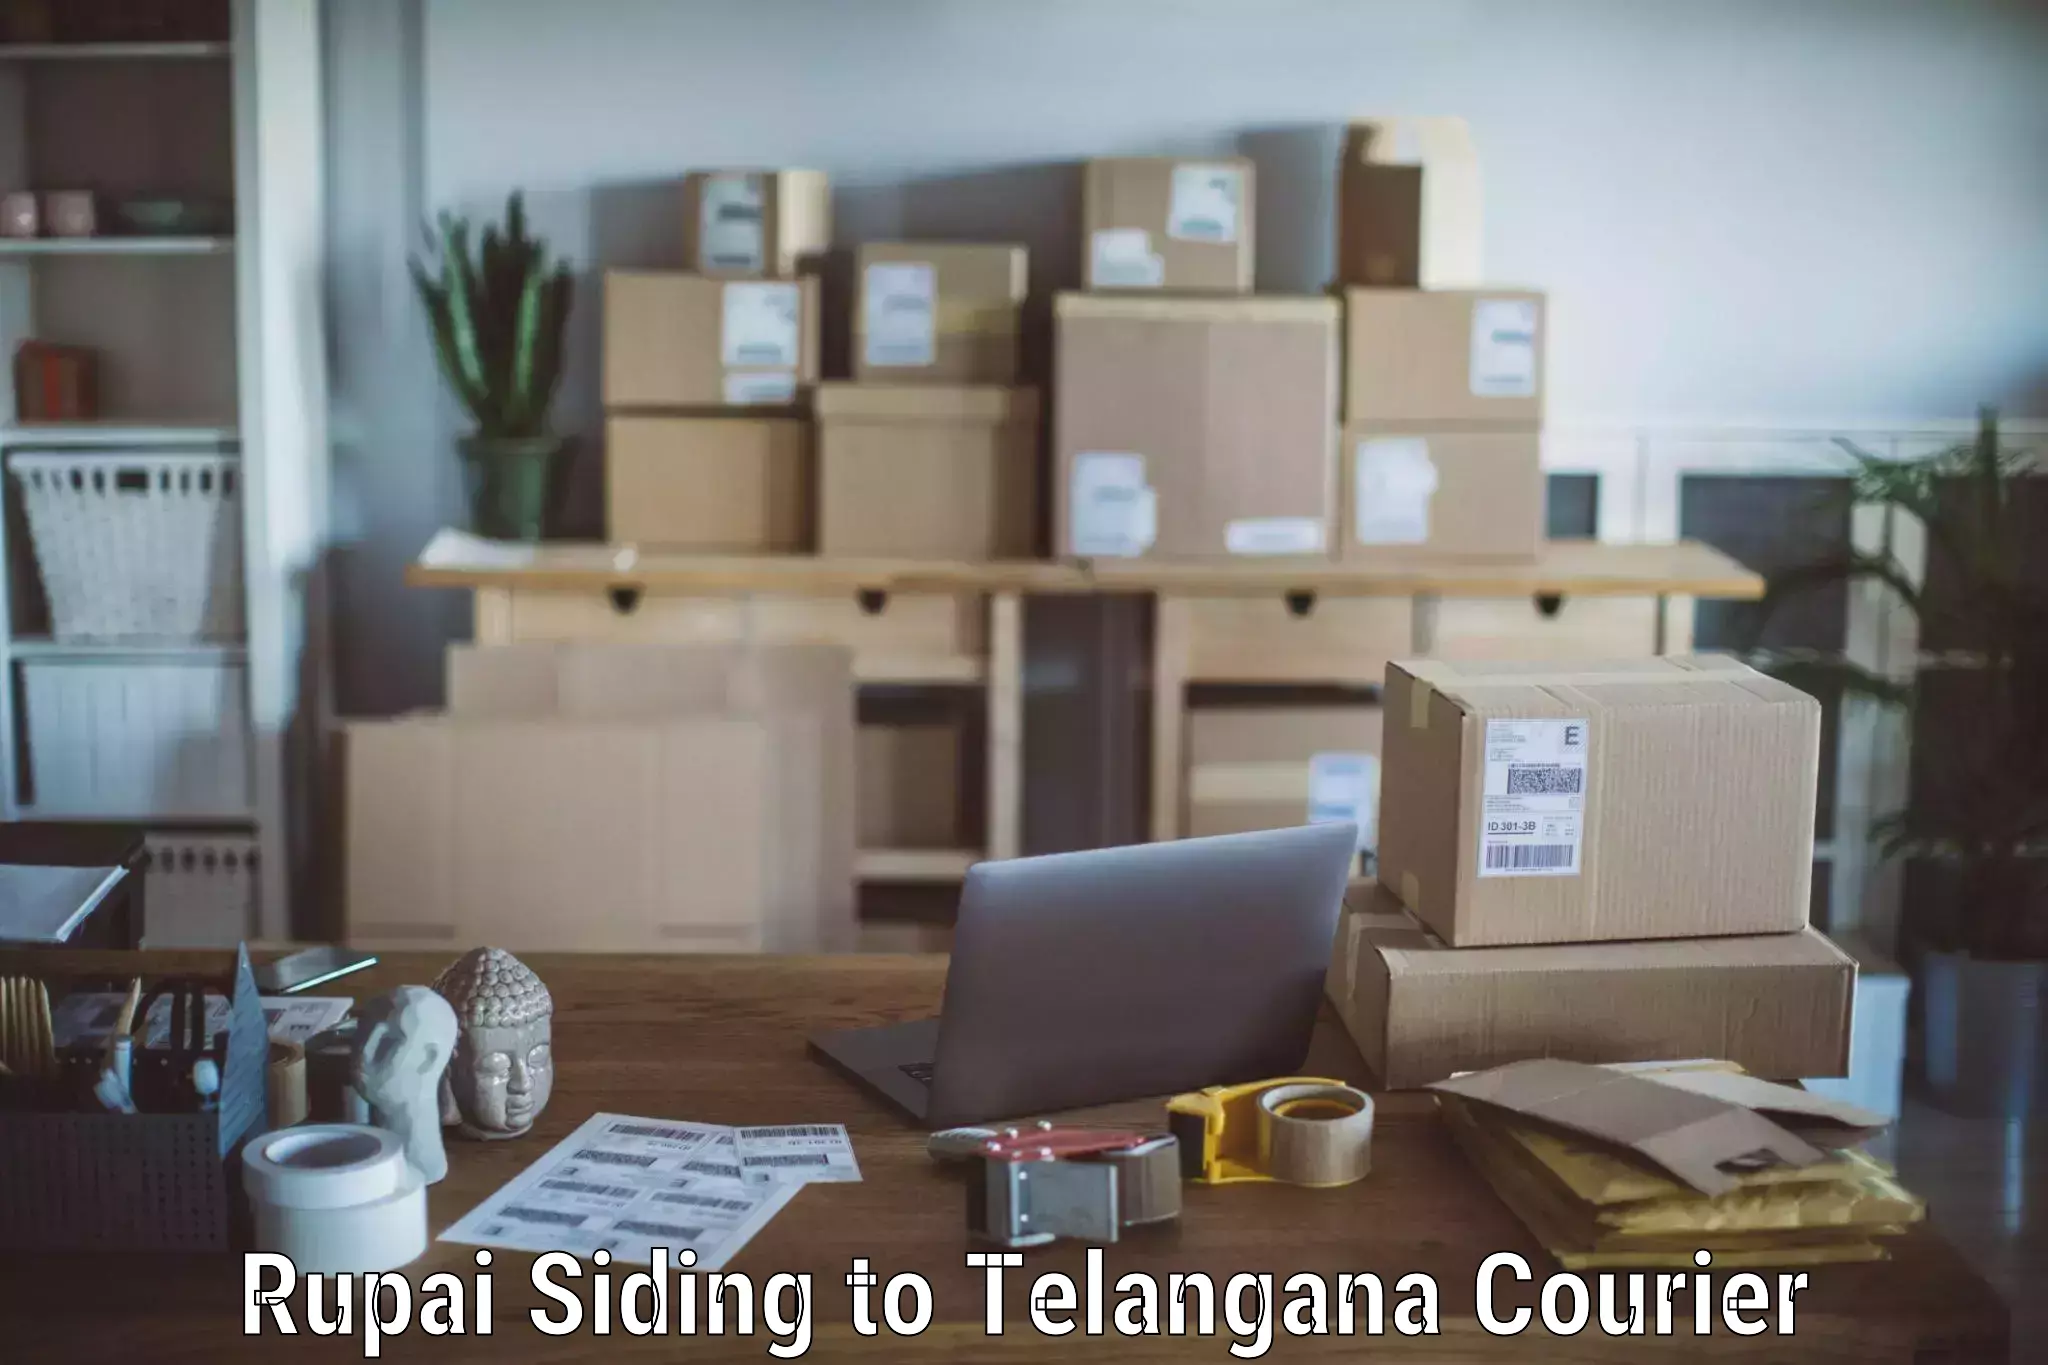 Expert packing and moving Rupai Siding to Secunderabad